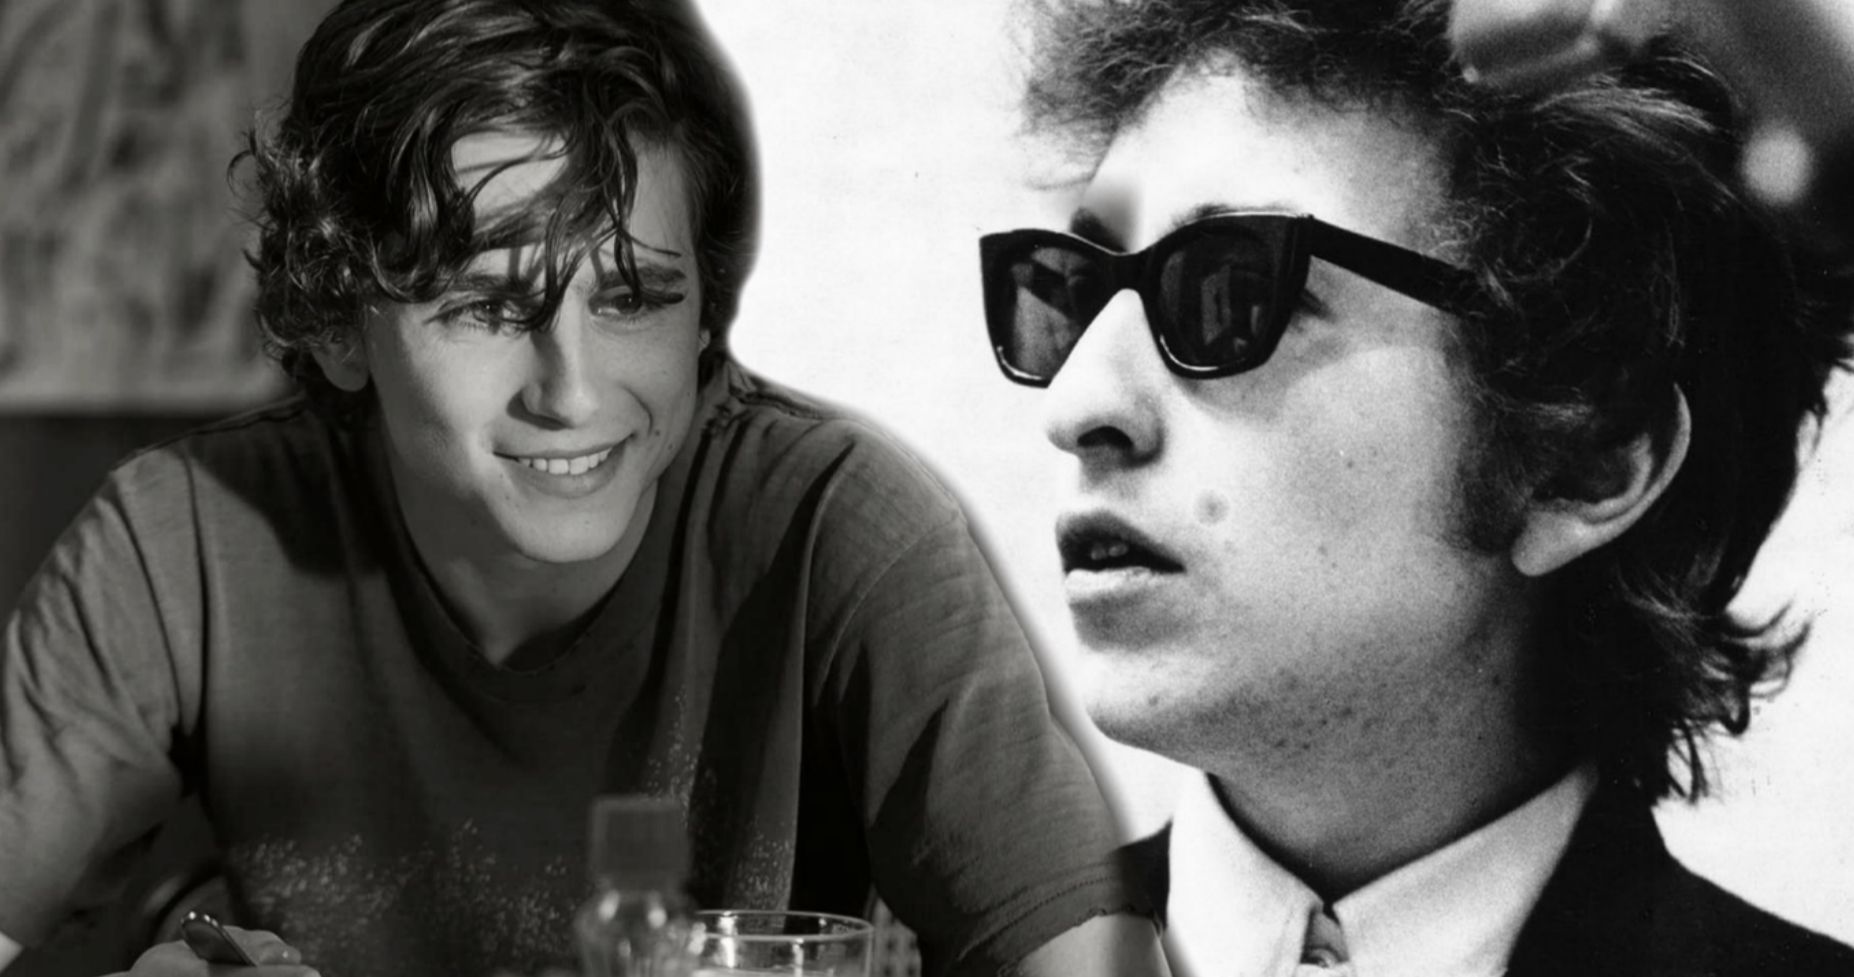 Timothee Chalamet to Play Young Bob Dylan in James Mangold Directed Biopic